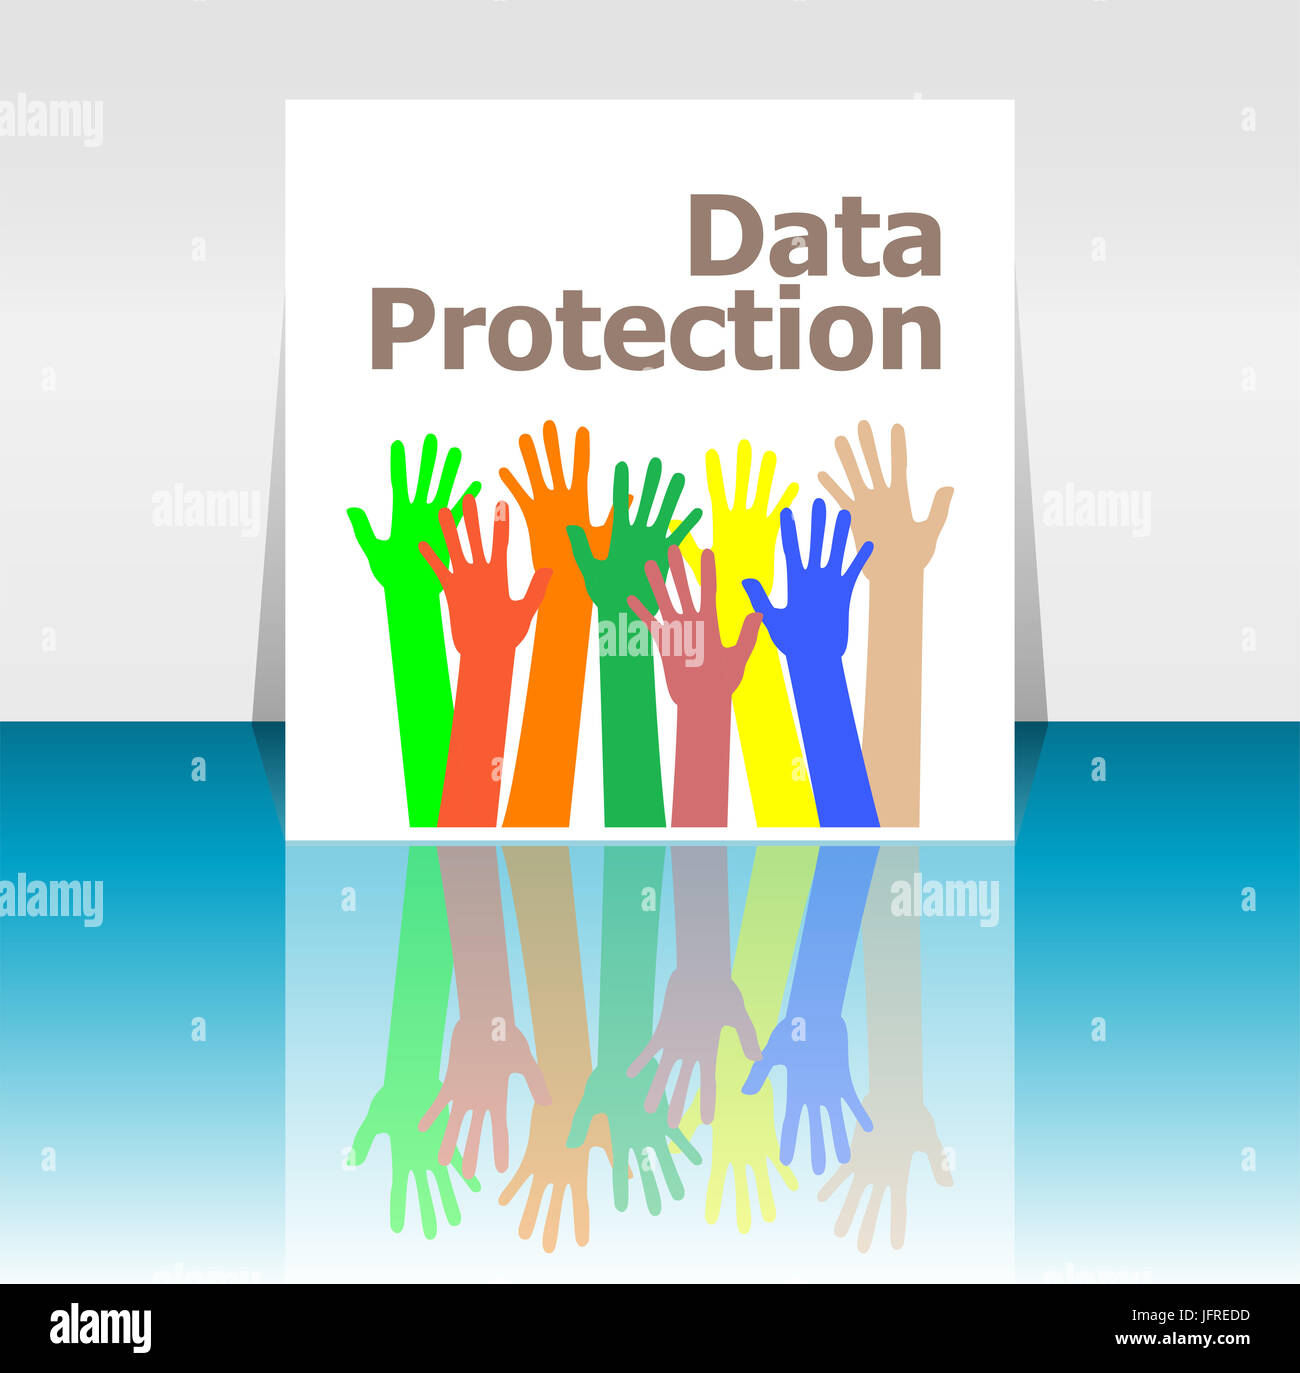 Text Data Protection. Security concept . Human hands silhouettes Stock Photo